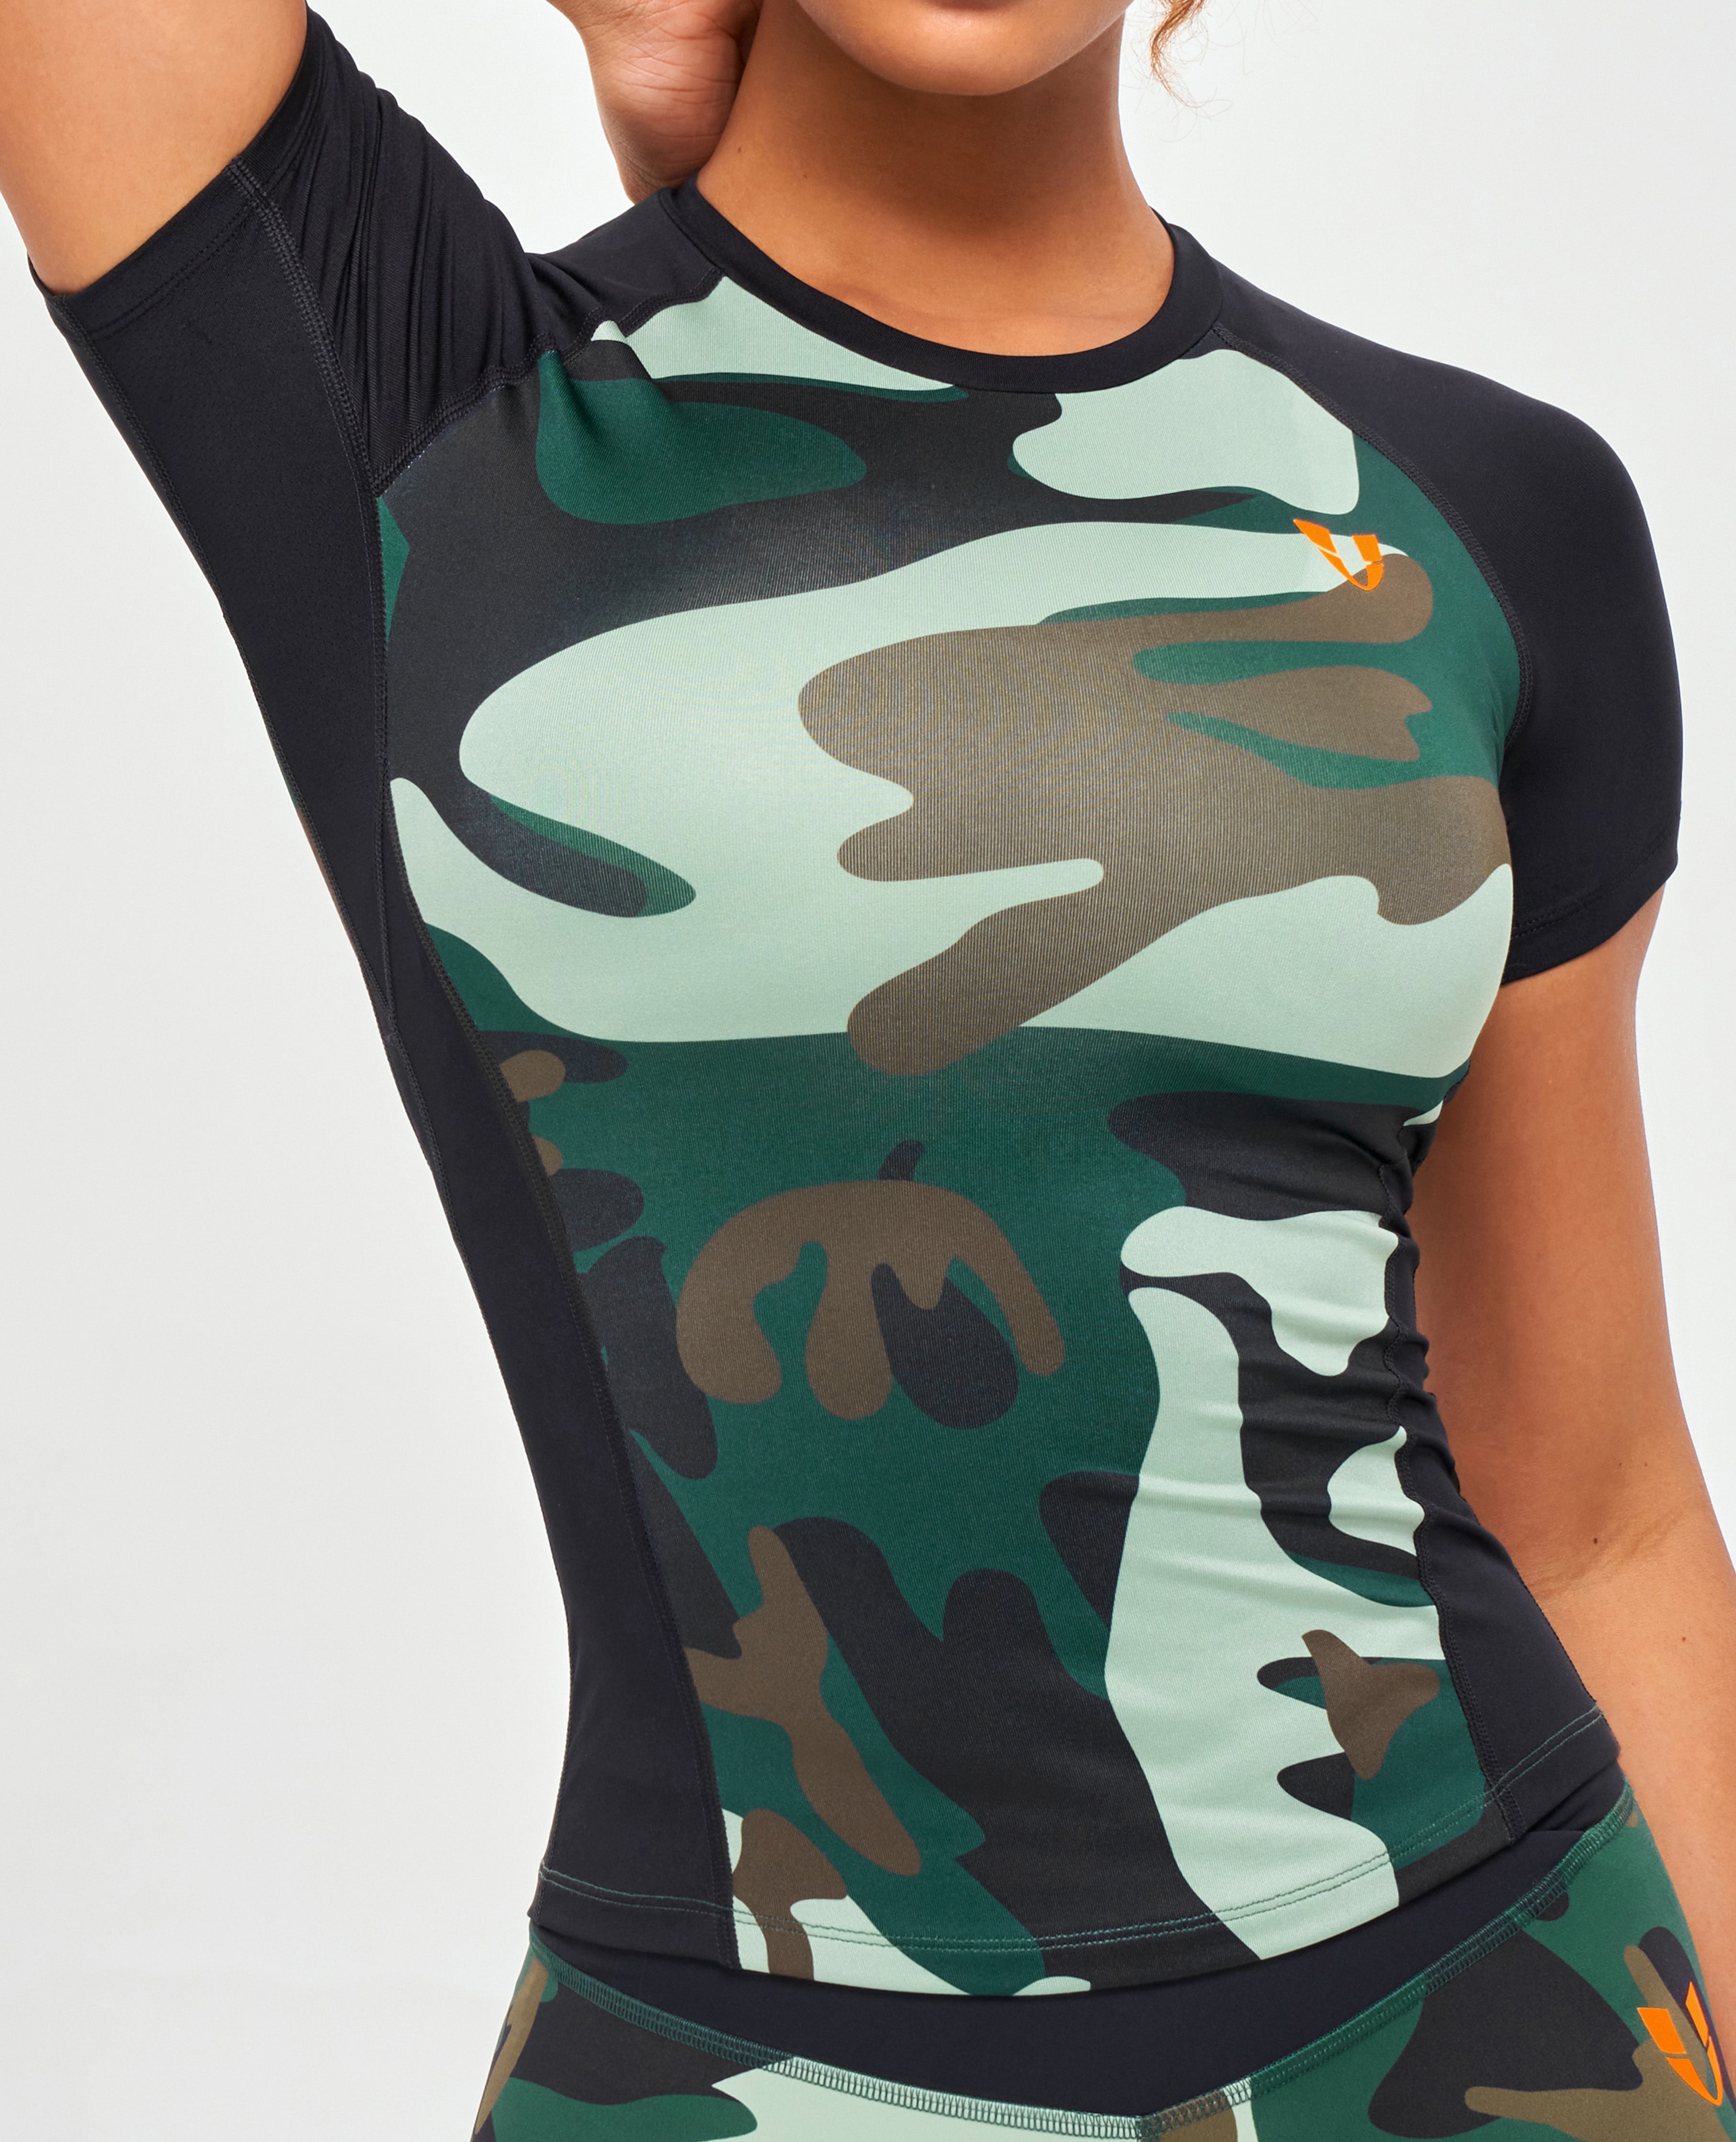 Contrast Color T-shirt - Green Camo and Black